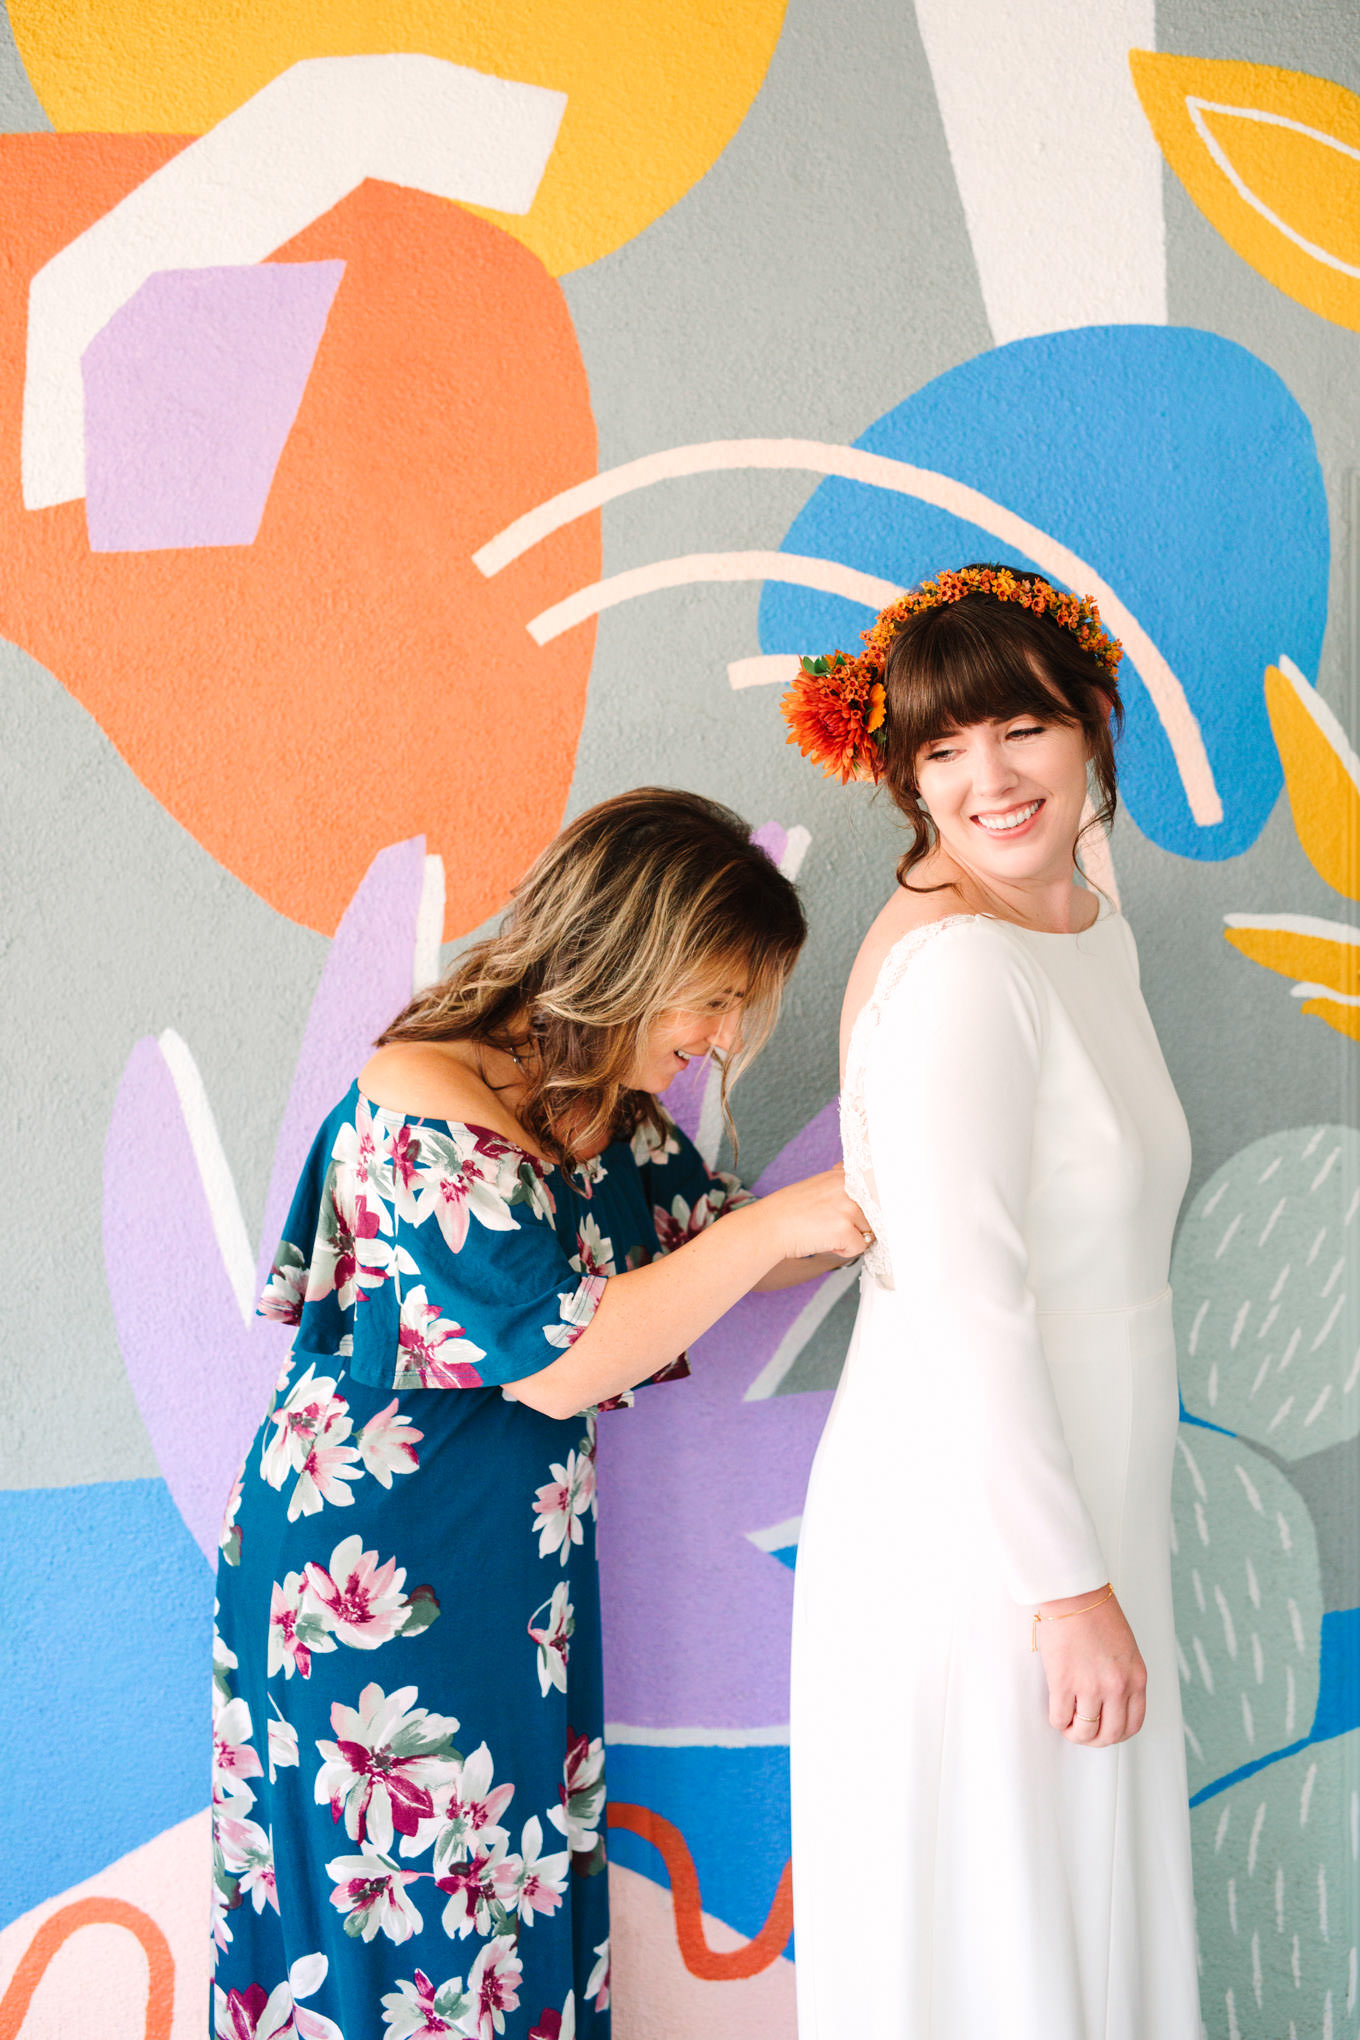 Mother of the bride finishing touches with fun mural | Vibrant backyard micro wedding featured on Green Wedding Shoes | Colorful LA wedding photography | #losangeleswedding #backyardwedding #microwedding #laweddingphotographer Source: Mary Costa Photography | Los Angeles